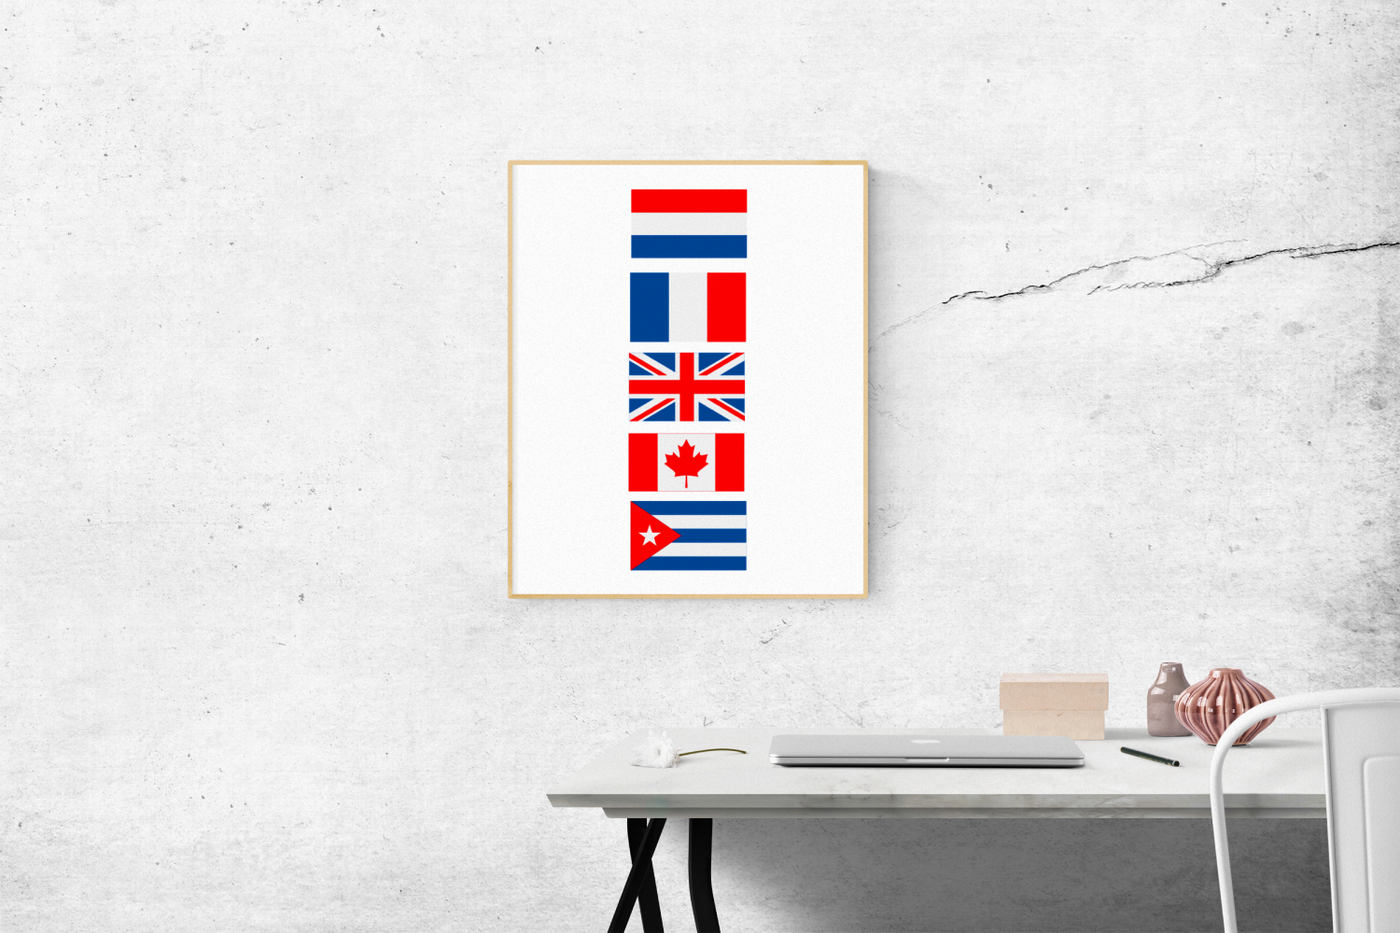 Poster of 5 international flags: Netherlands, France, United Kingdom, Canada, and Cuba.